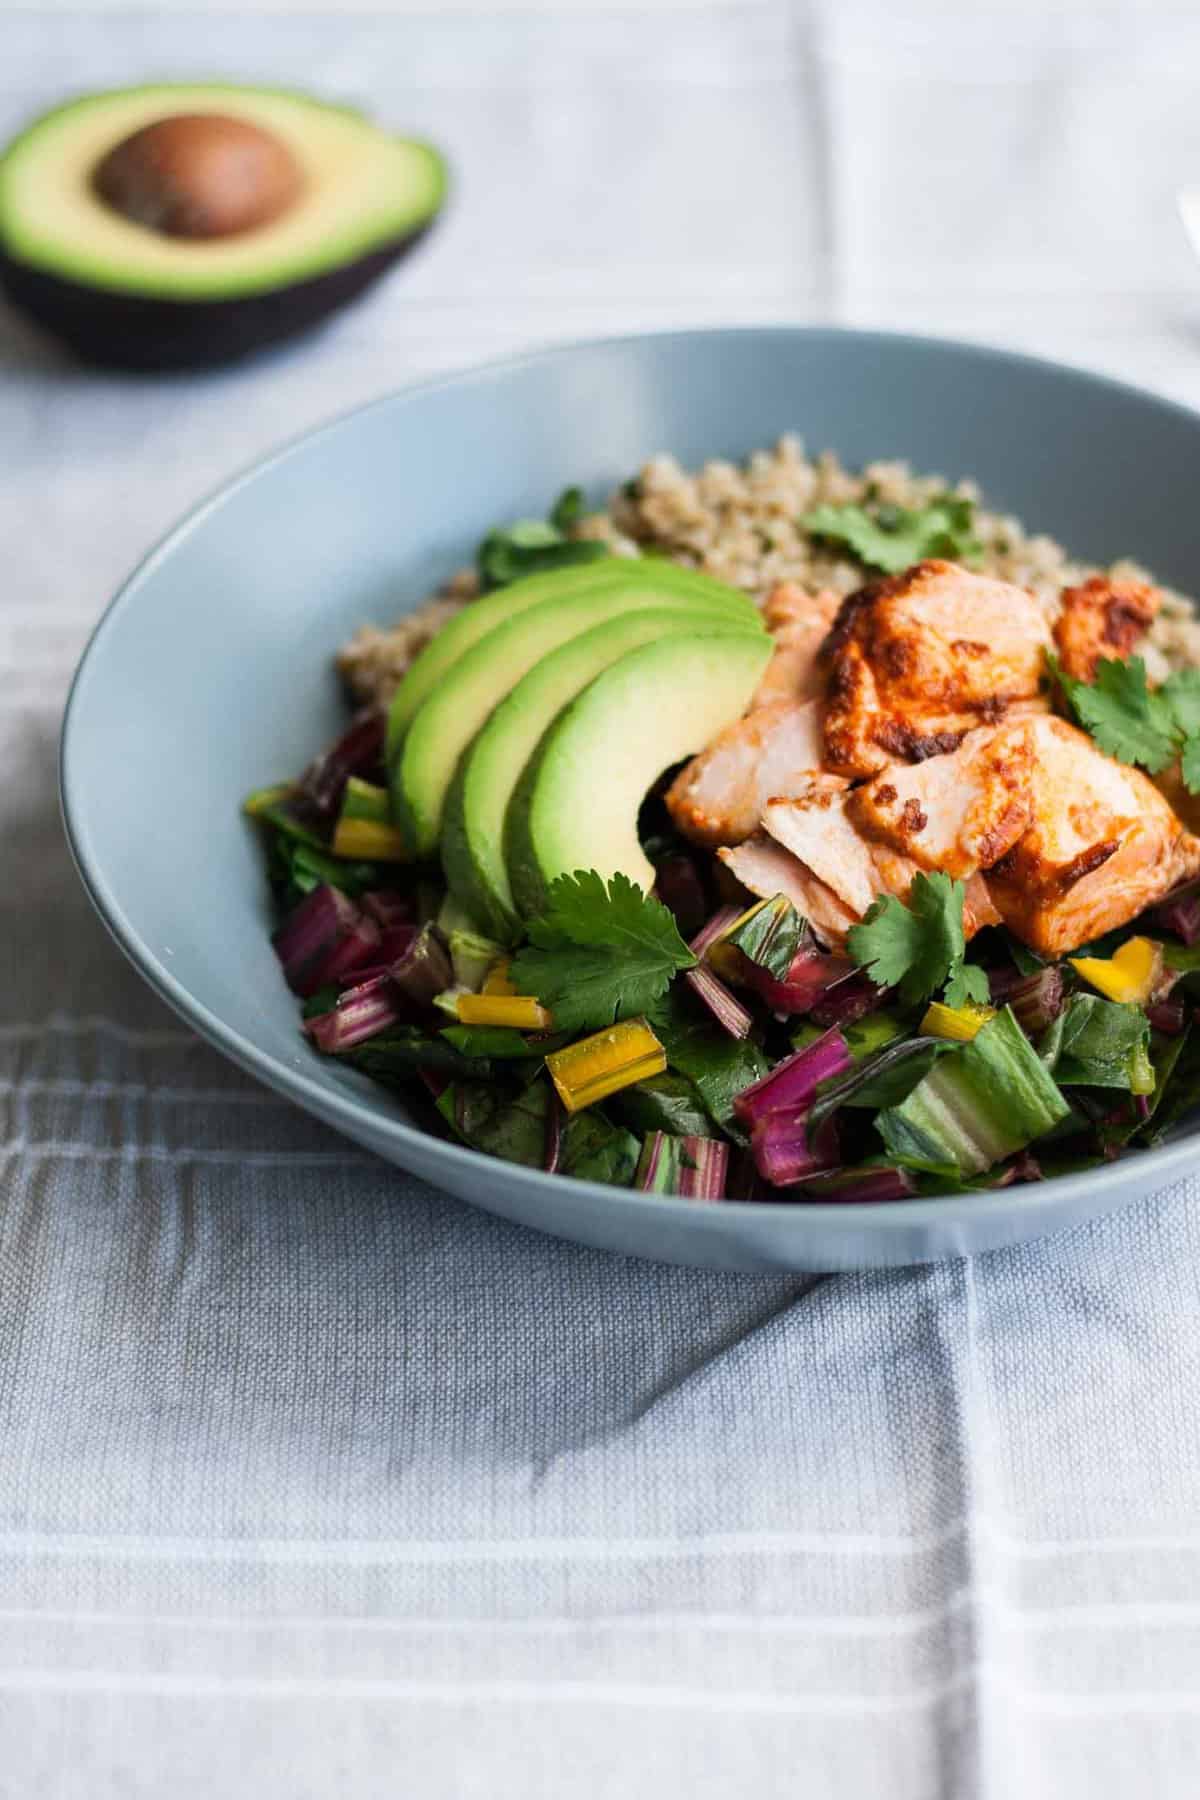 Baked Chipotle Salmon Freekeh Bowls - delicious bowls of hearty freekeh and garlicky greens topped with moist, smoky salmon - a quick, easy and nutritious lunch or dinner recipe! | eatloveeats.com